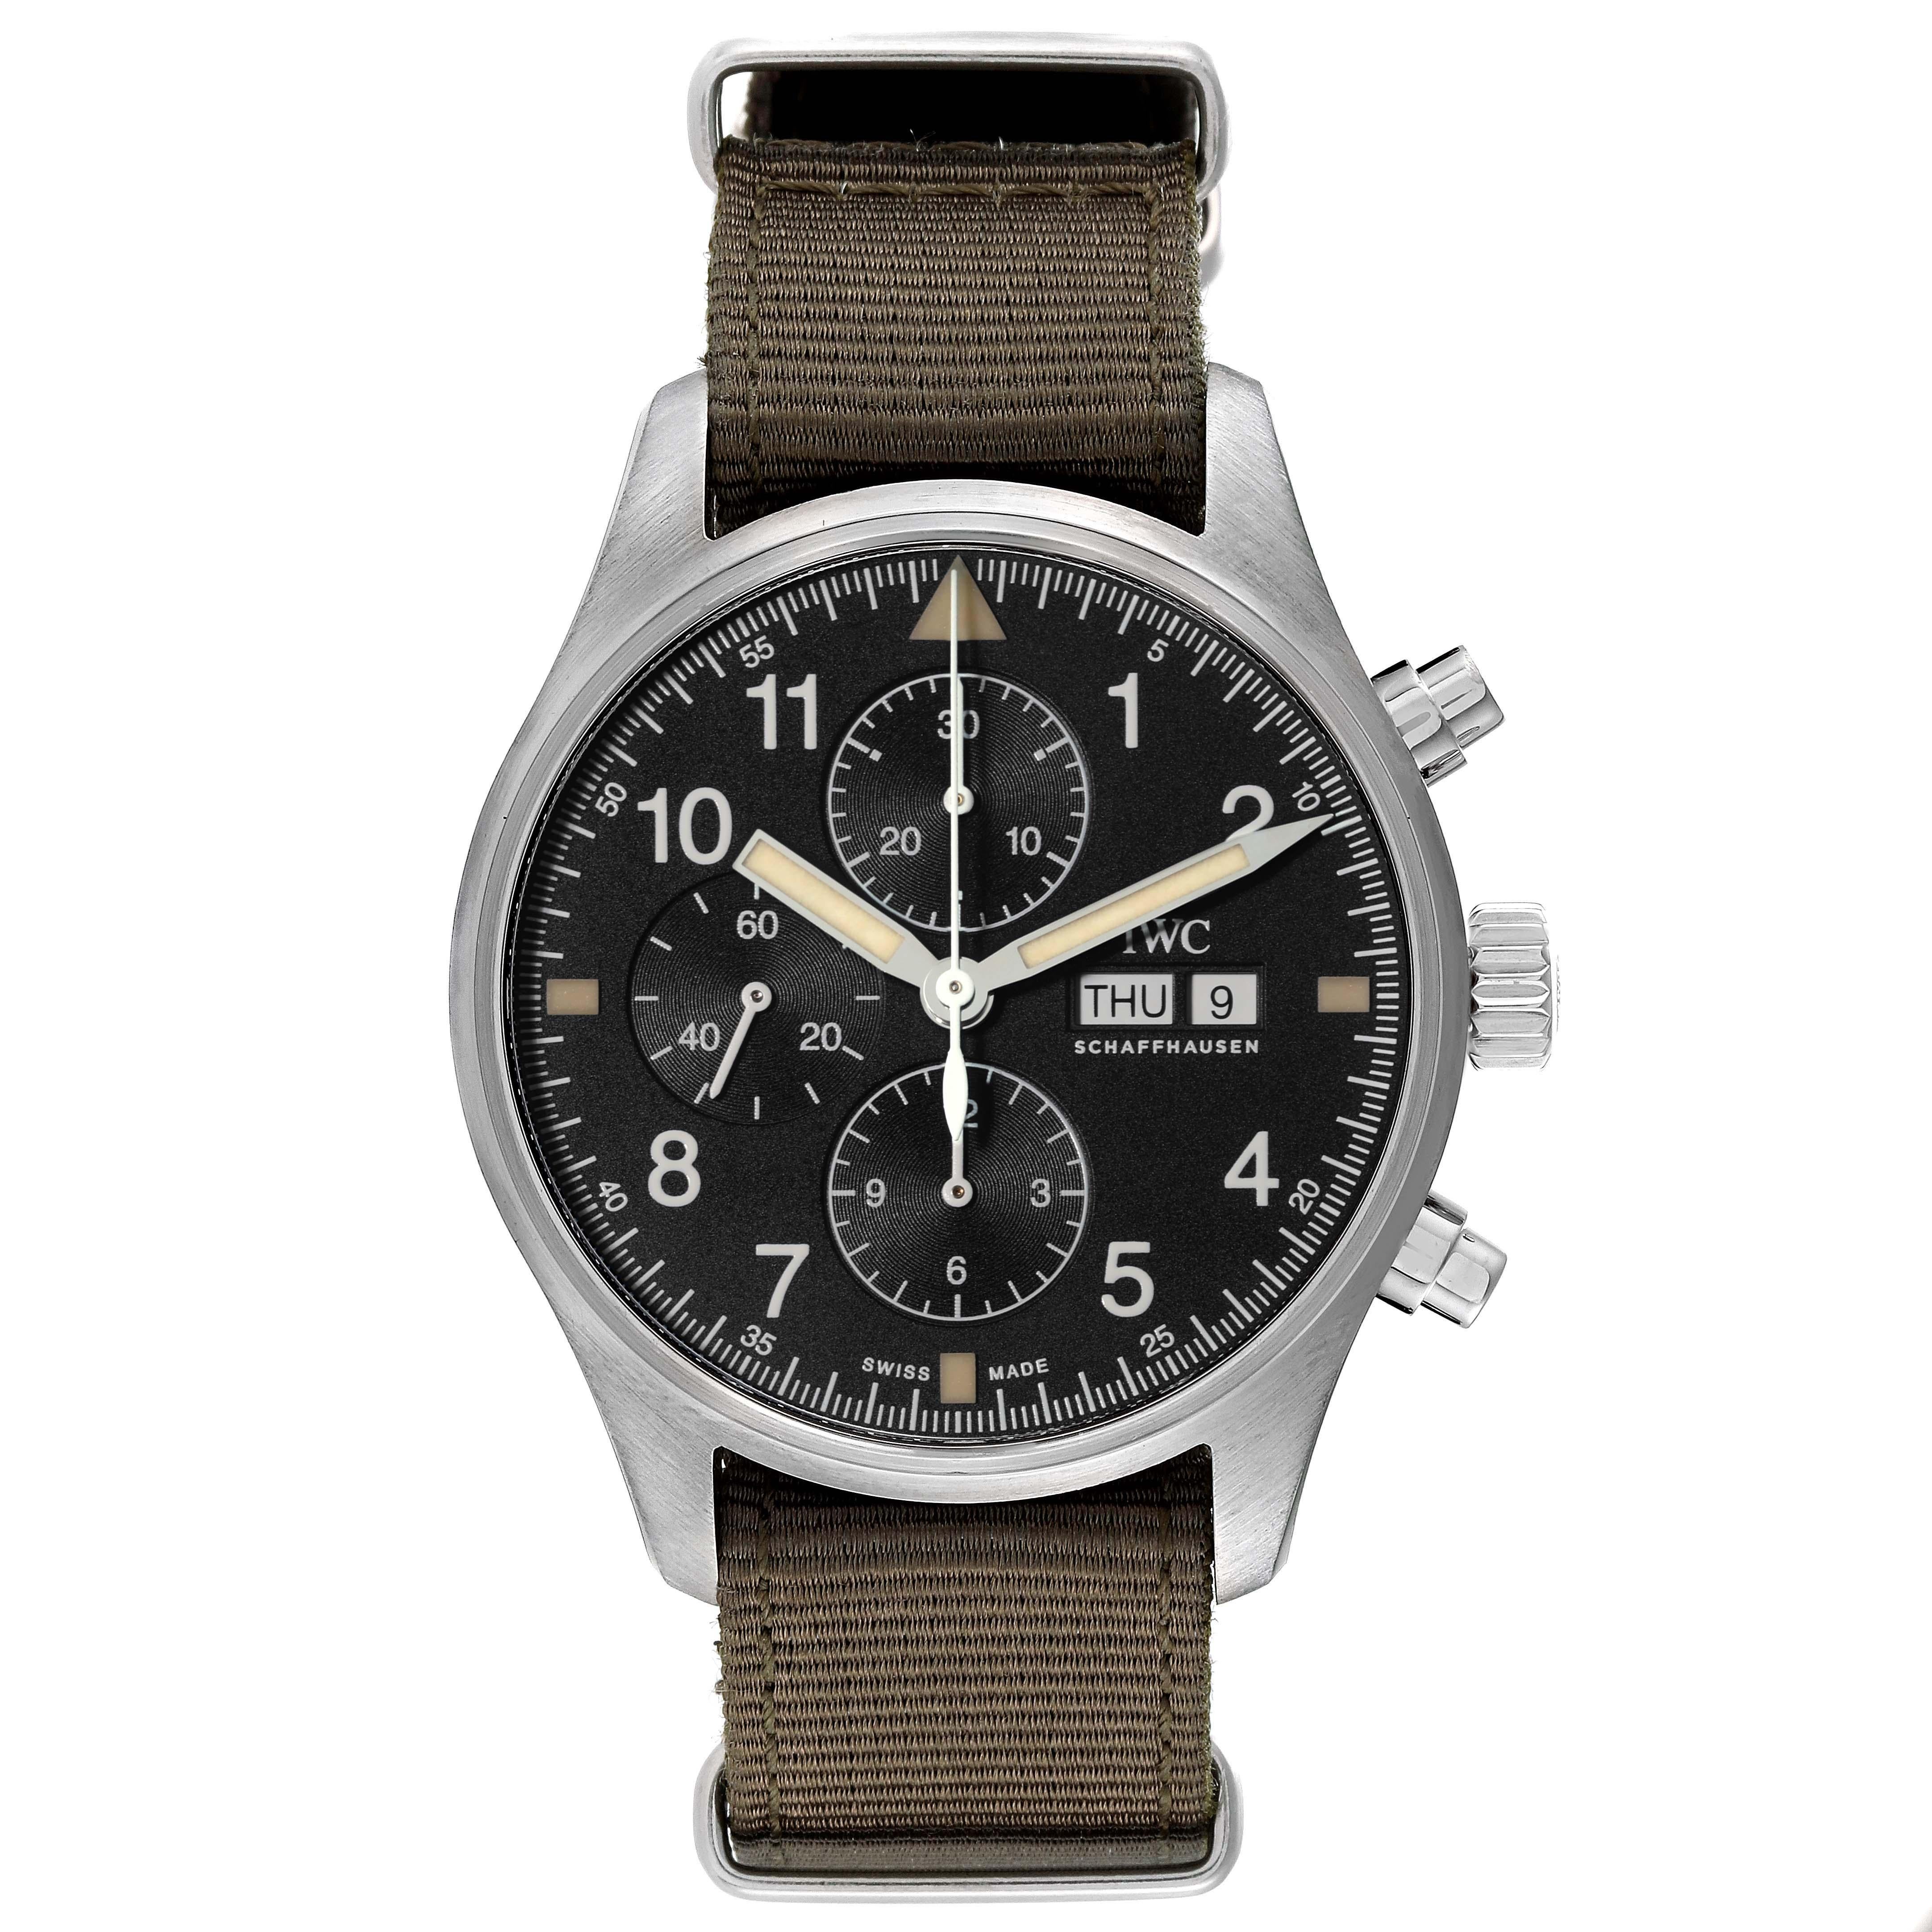 IWC Spitfire Pilot Steel Black Dial Chronograph Mens Watch IW377724 Box Card. Automatic self-winding chronograph movement. Stainless steel case 43.0 mm in diameter. Stainless steel bezel. Scratch resistant sapphire crystal. Black dial with